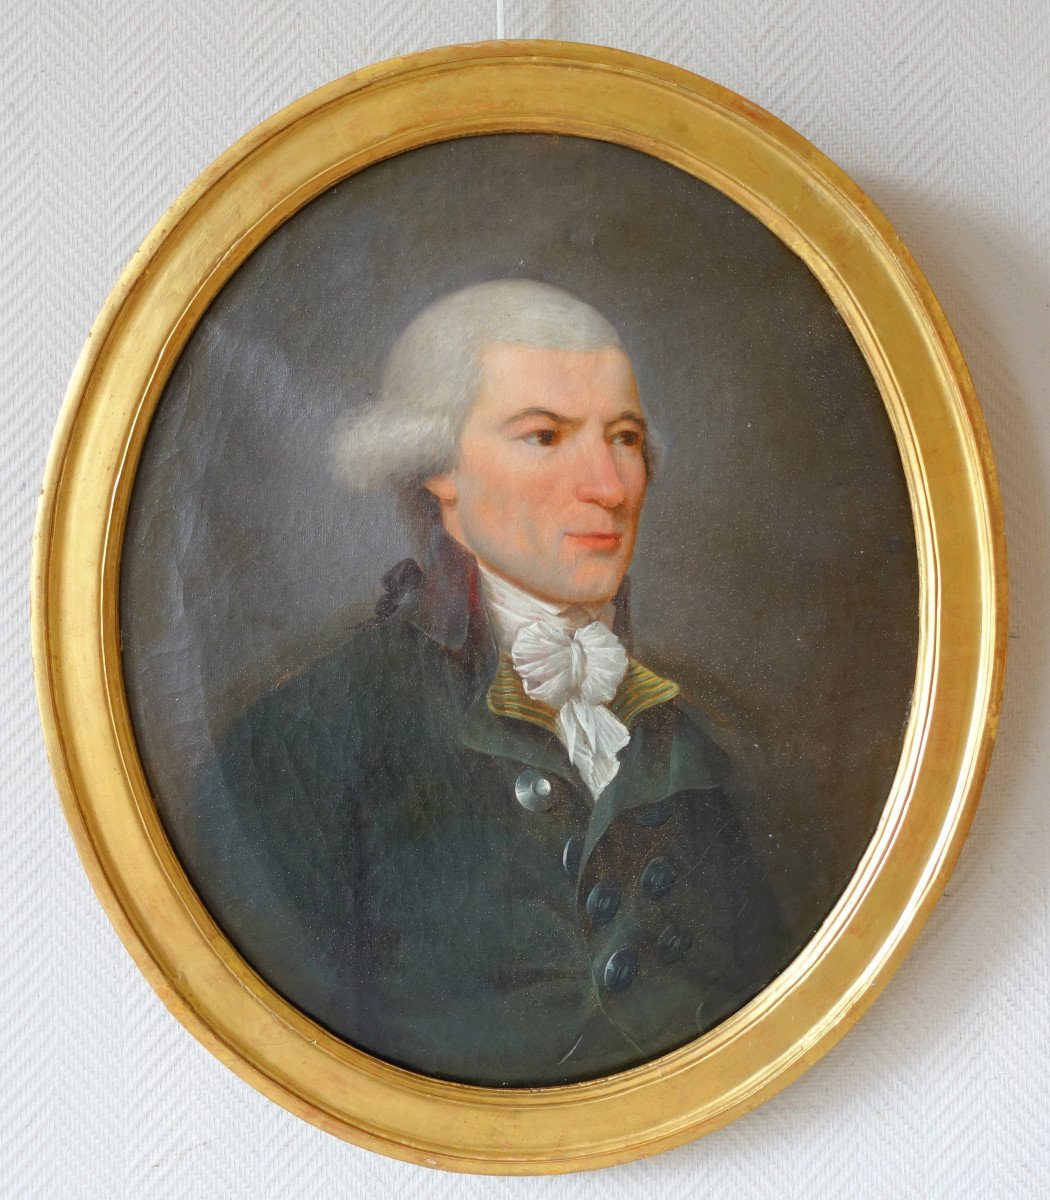 French School From The 18th Century, Portrait Of A Royalist Under The Directory - Hst